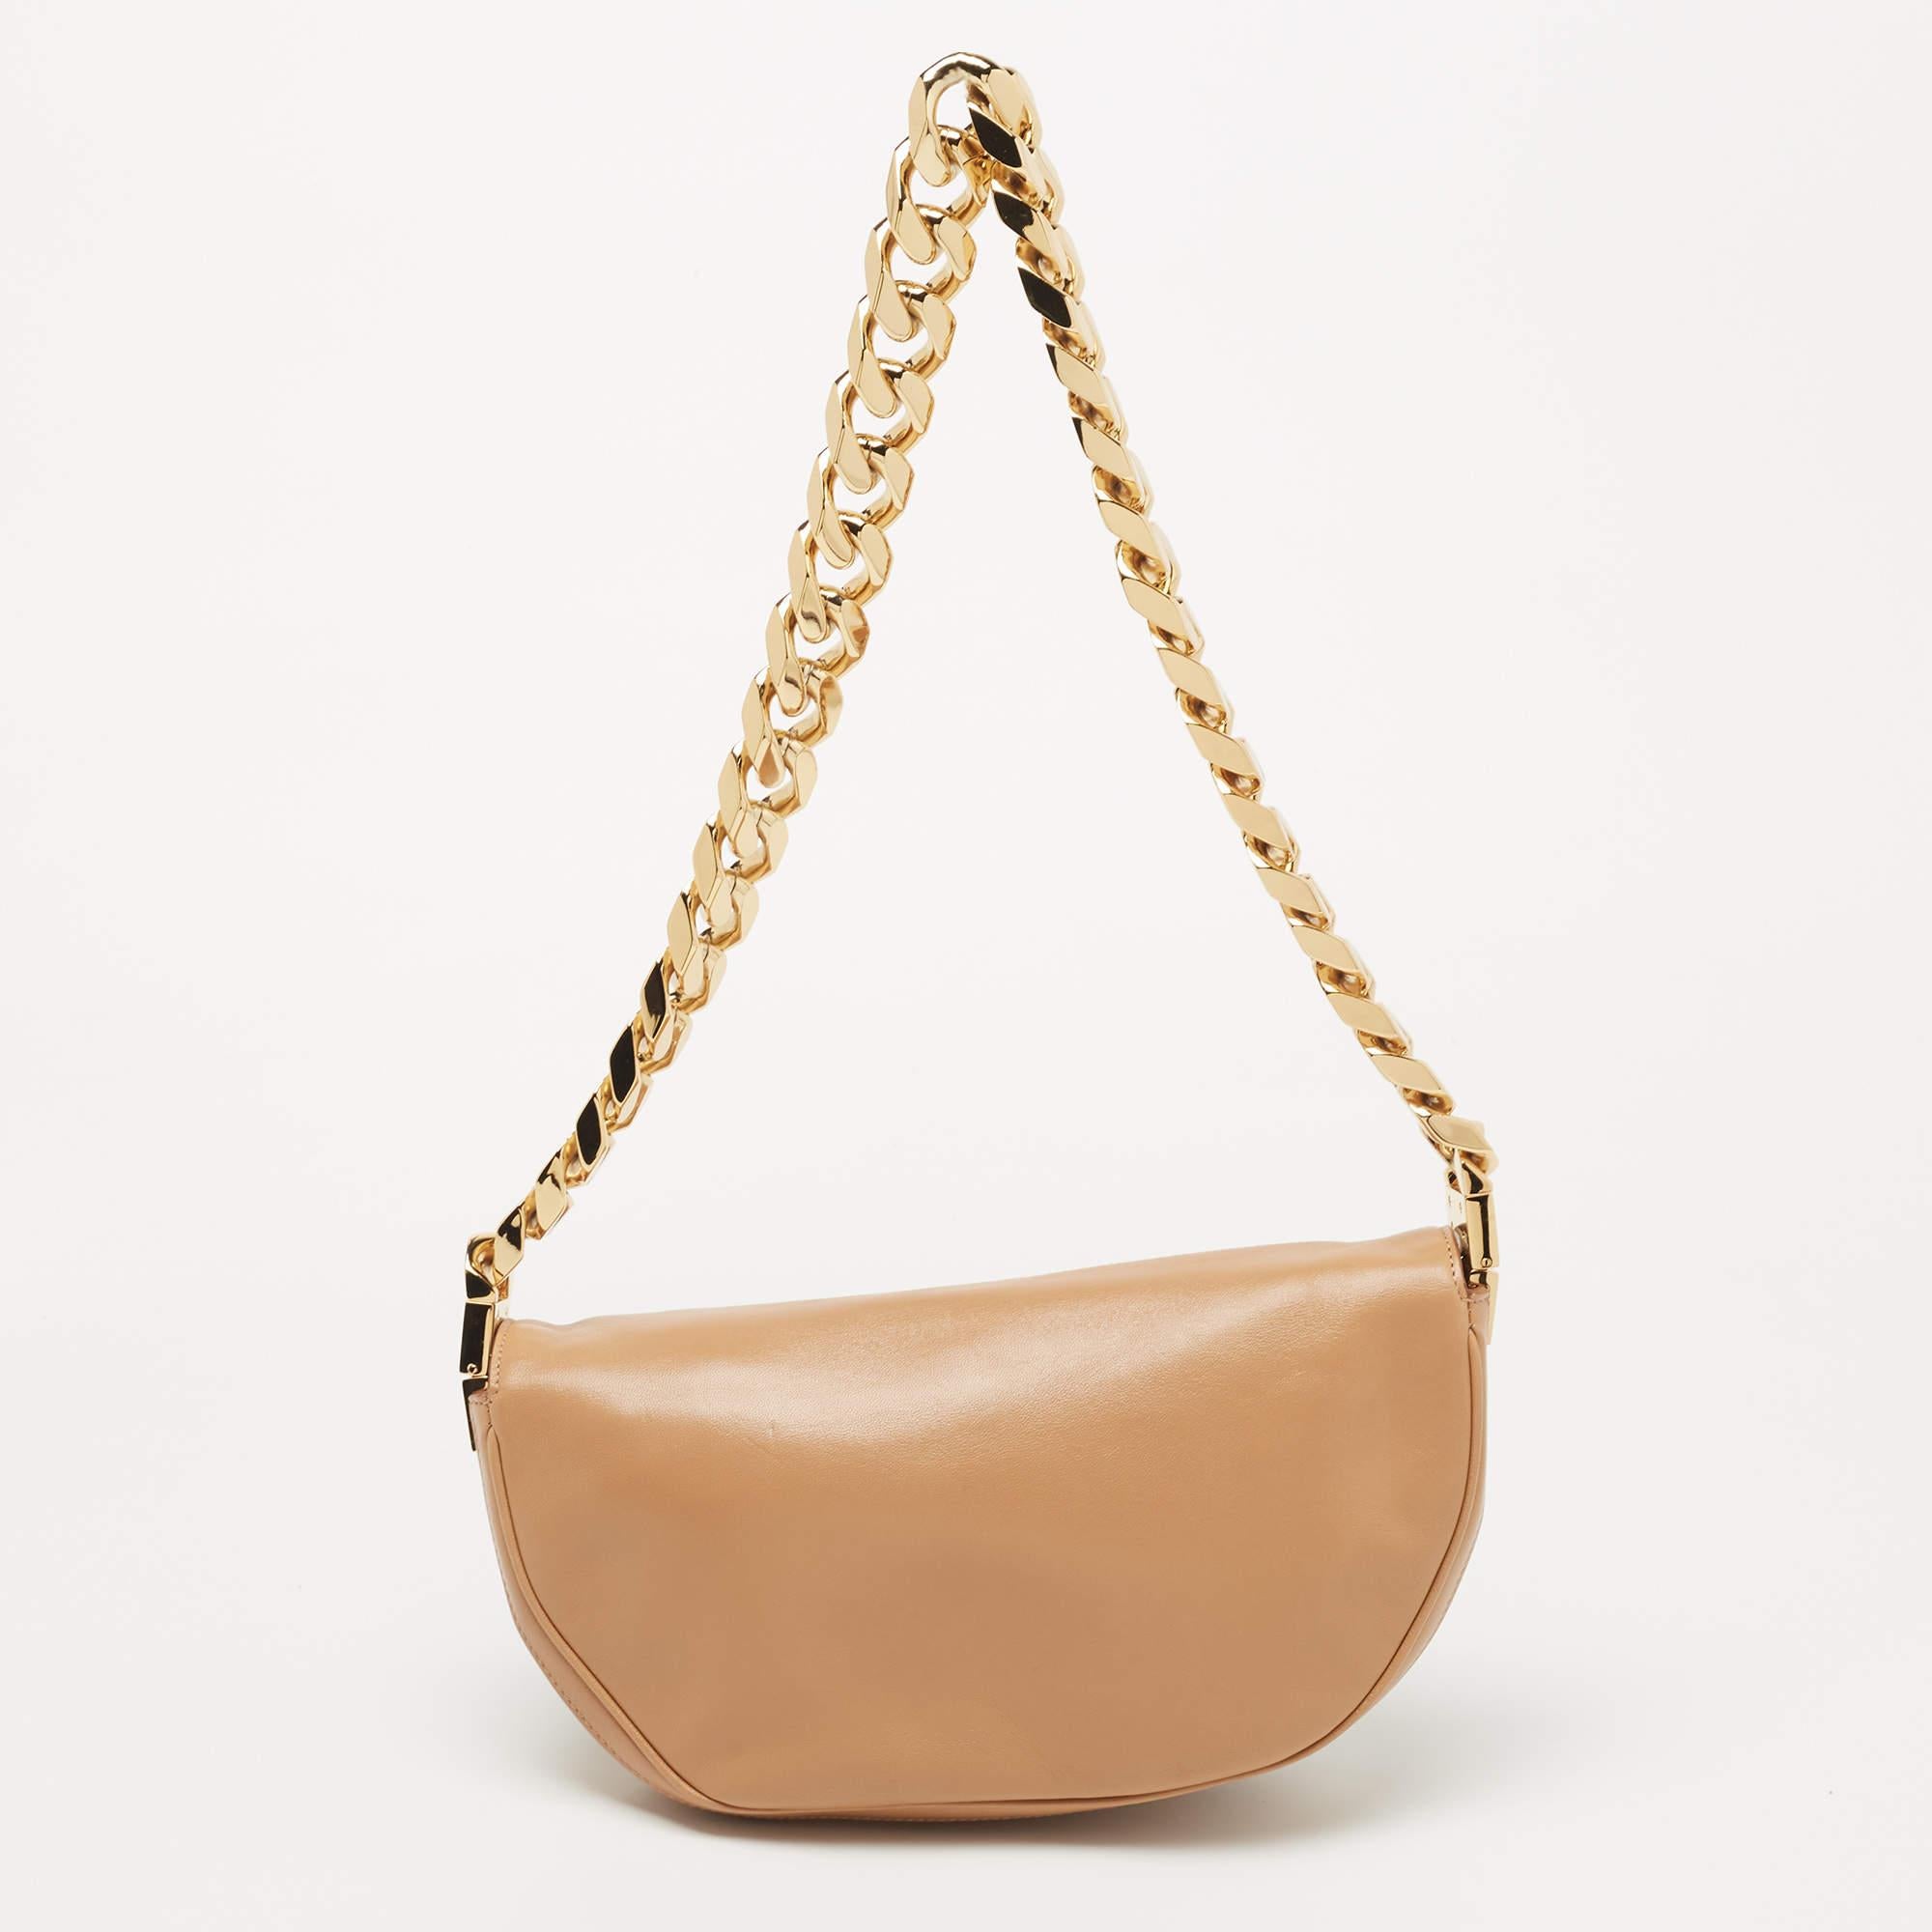 Structured, sophisticated, and stylish are some words that describe this shoulder bag! Crafted from best quality material, the creation is adorned with the label's signature appeal and equipped with a well-spaced interior. Carry it to parties or